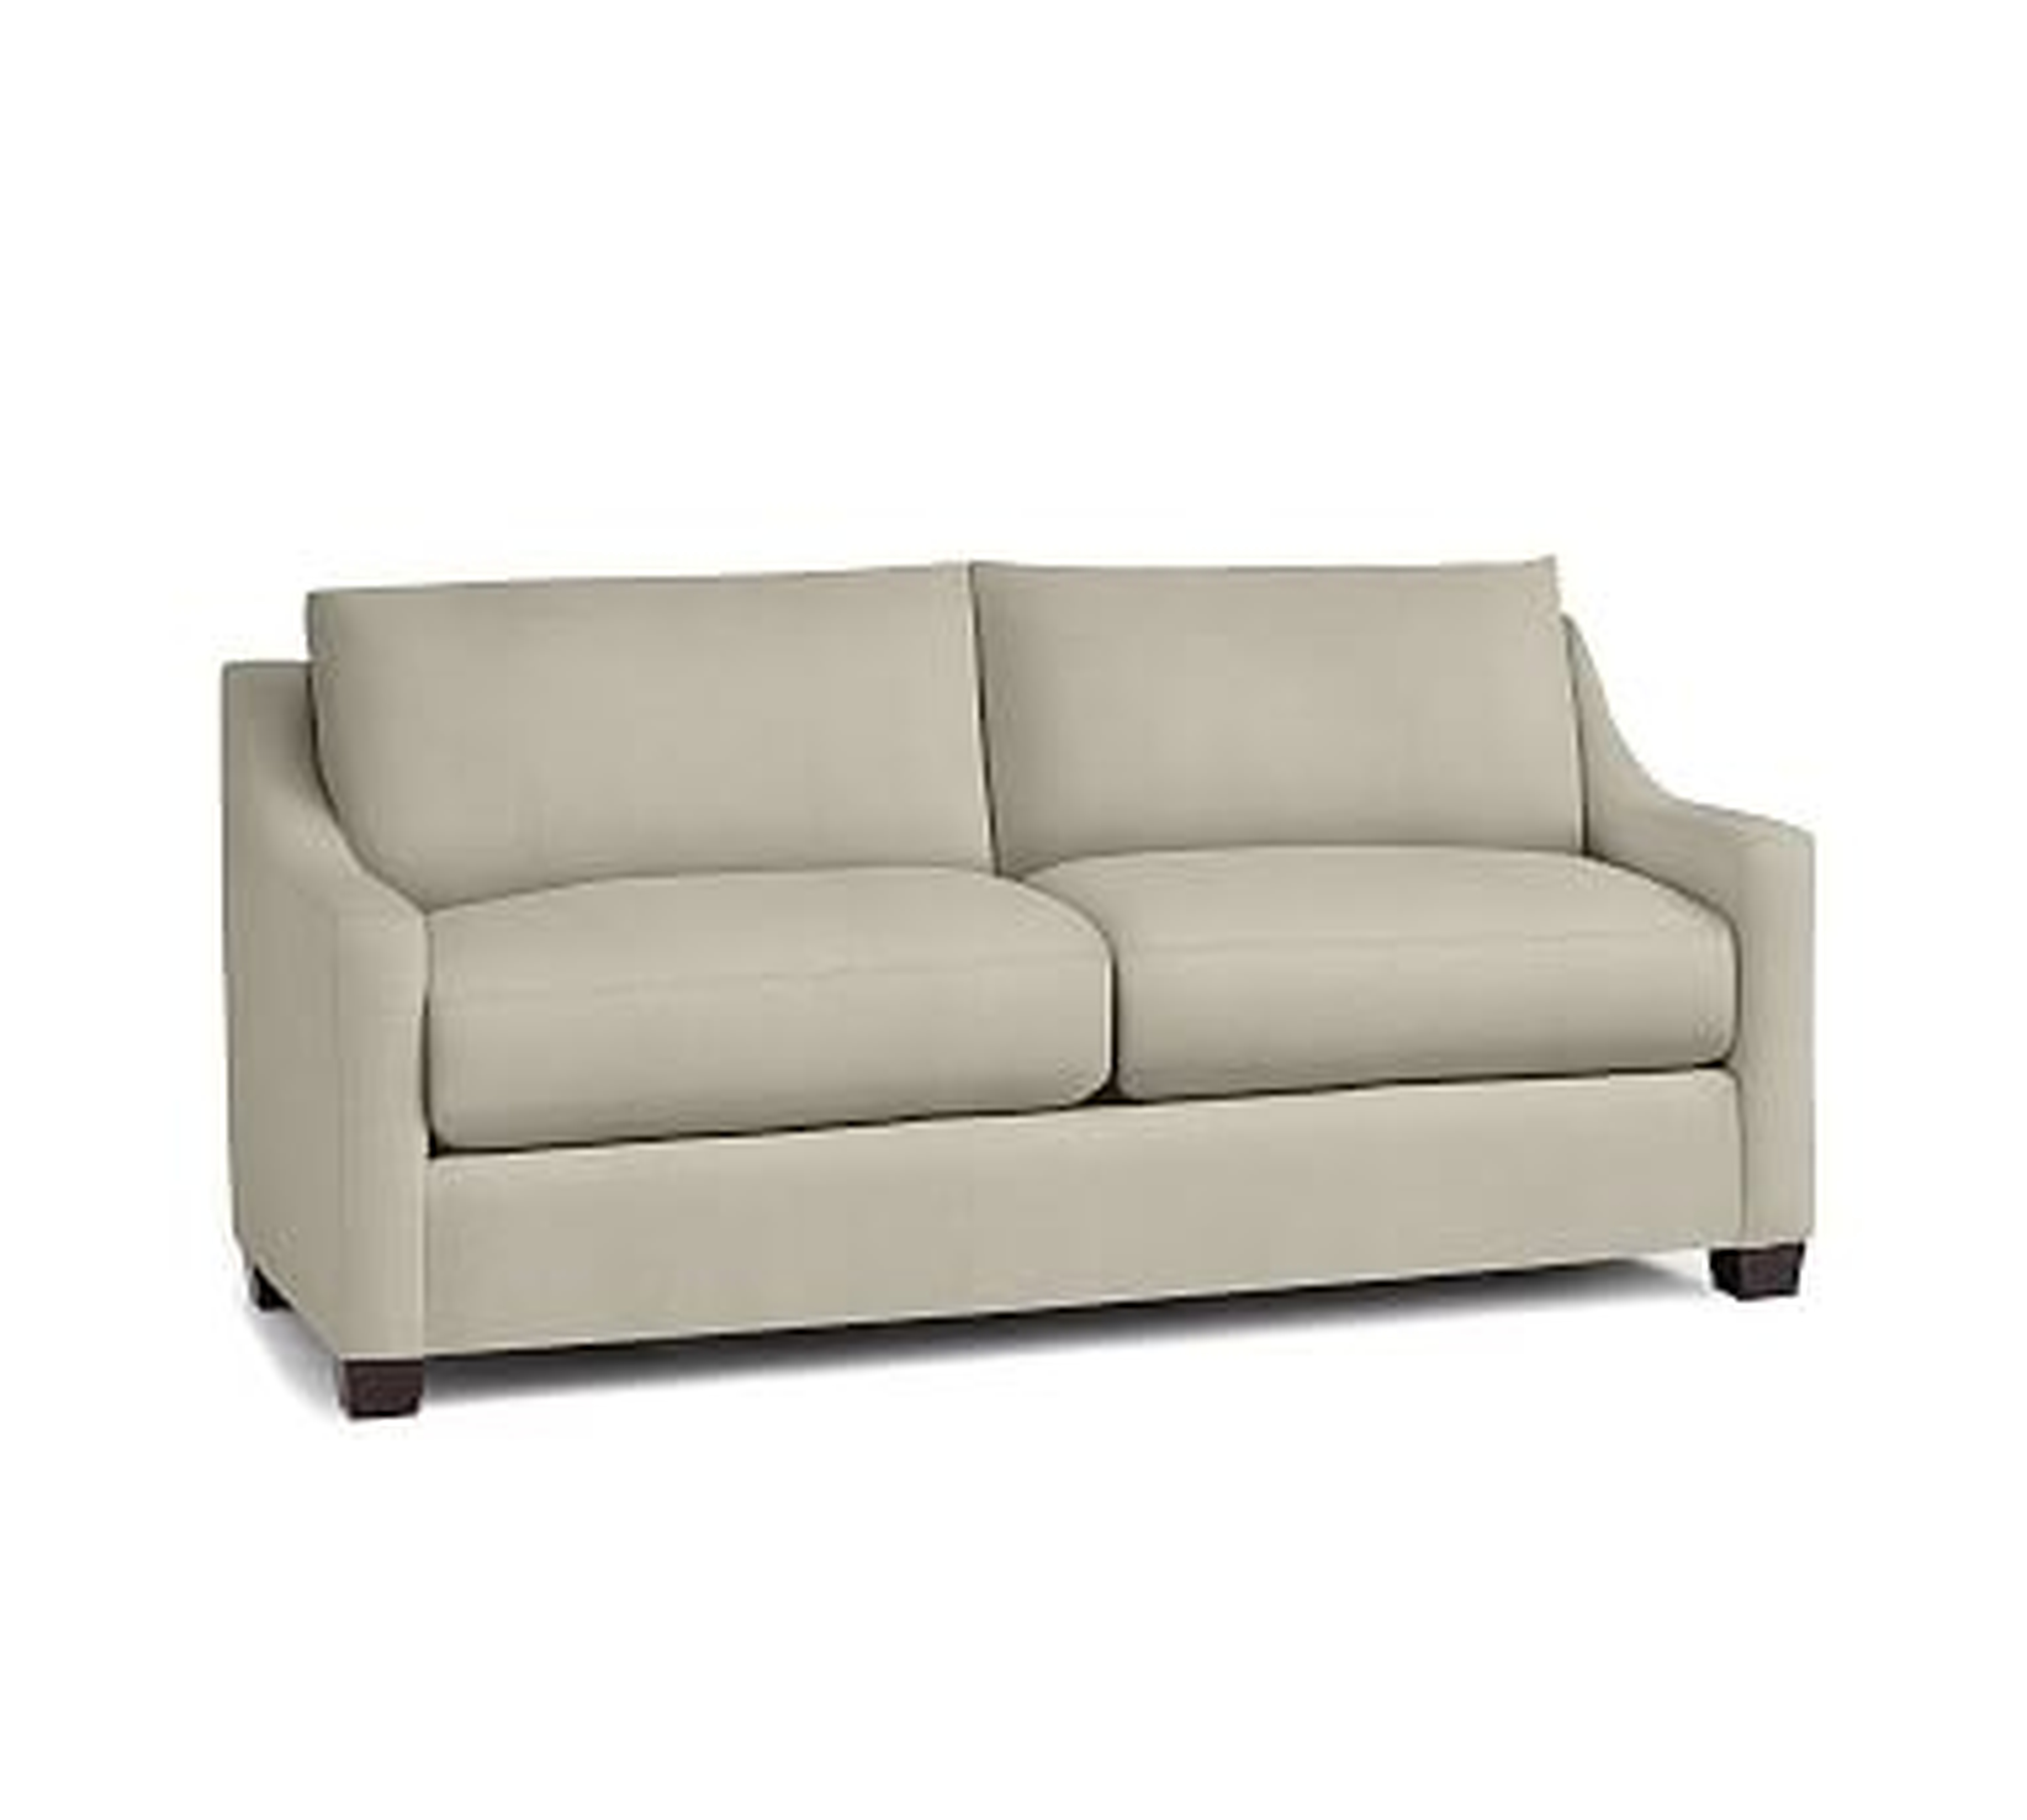 York Slope Arm Upholstered Grand Sofa 95.5", Down Blend Wrapped Cushions, Premium Performance Basketweave Oatmeal - Pottery Barn